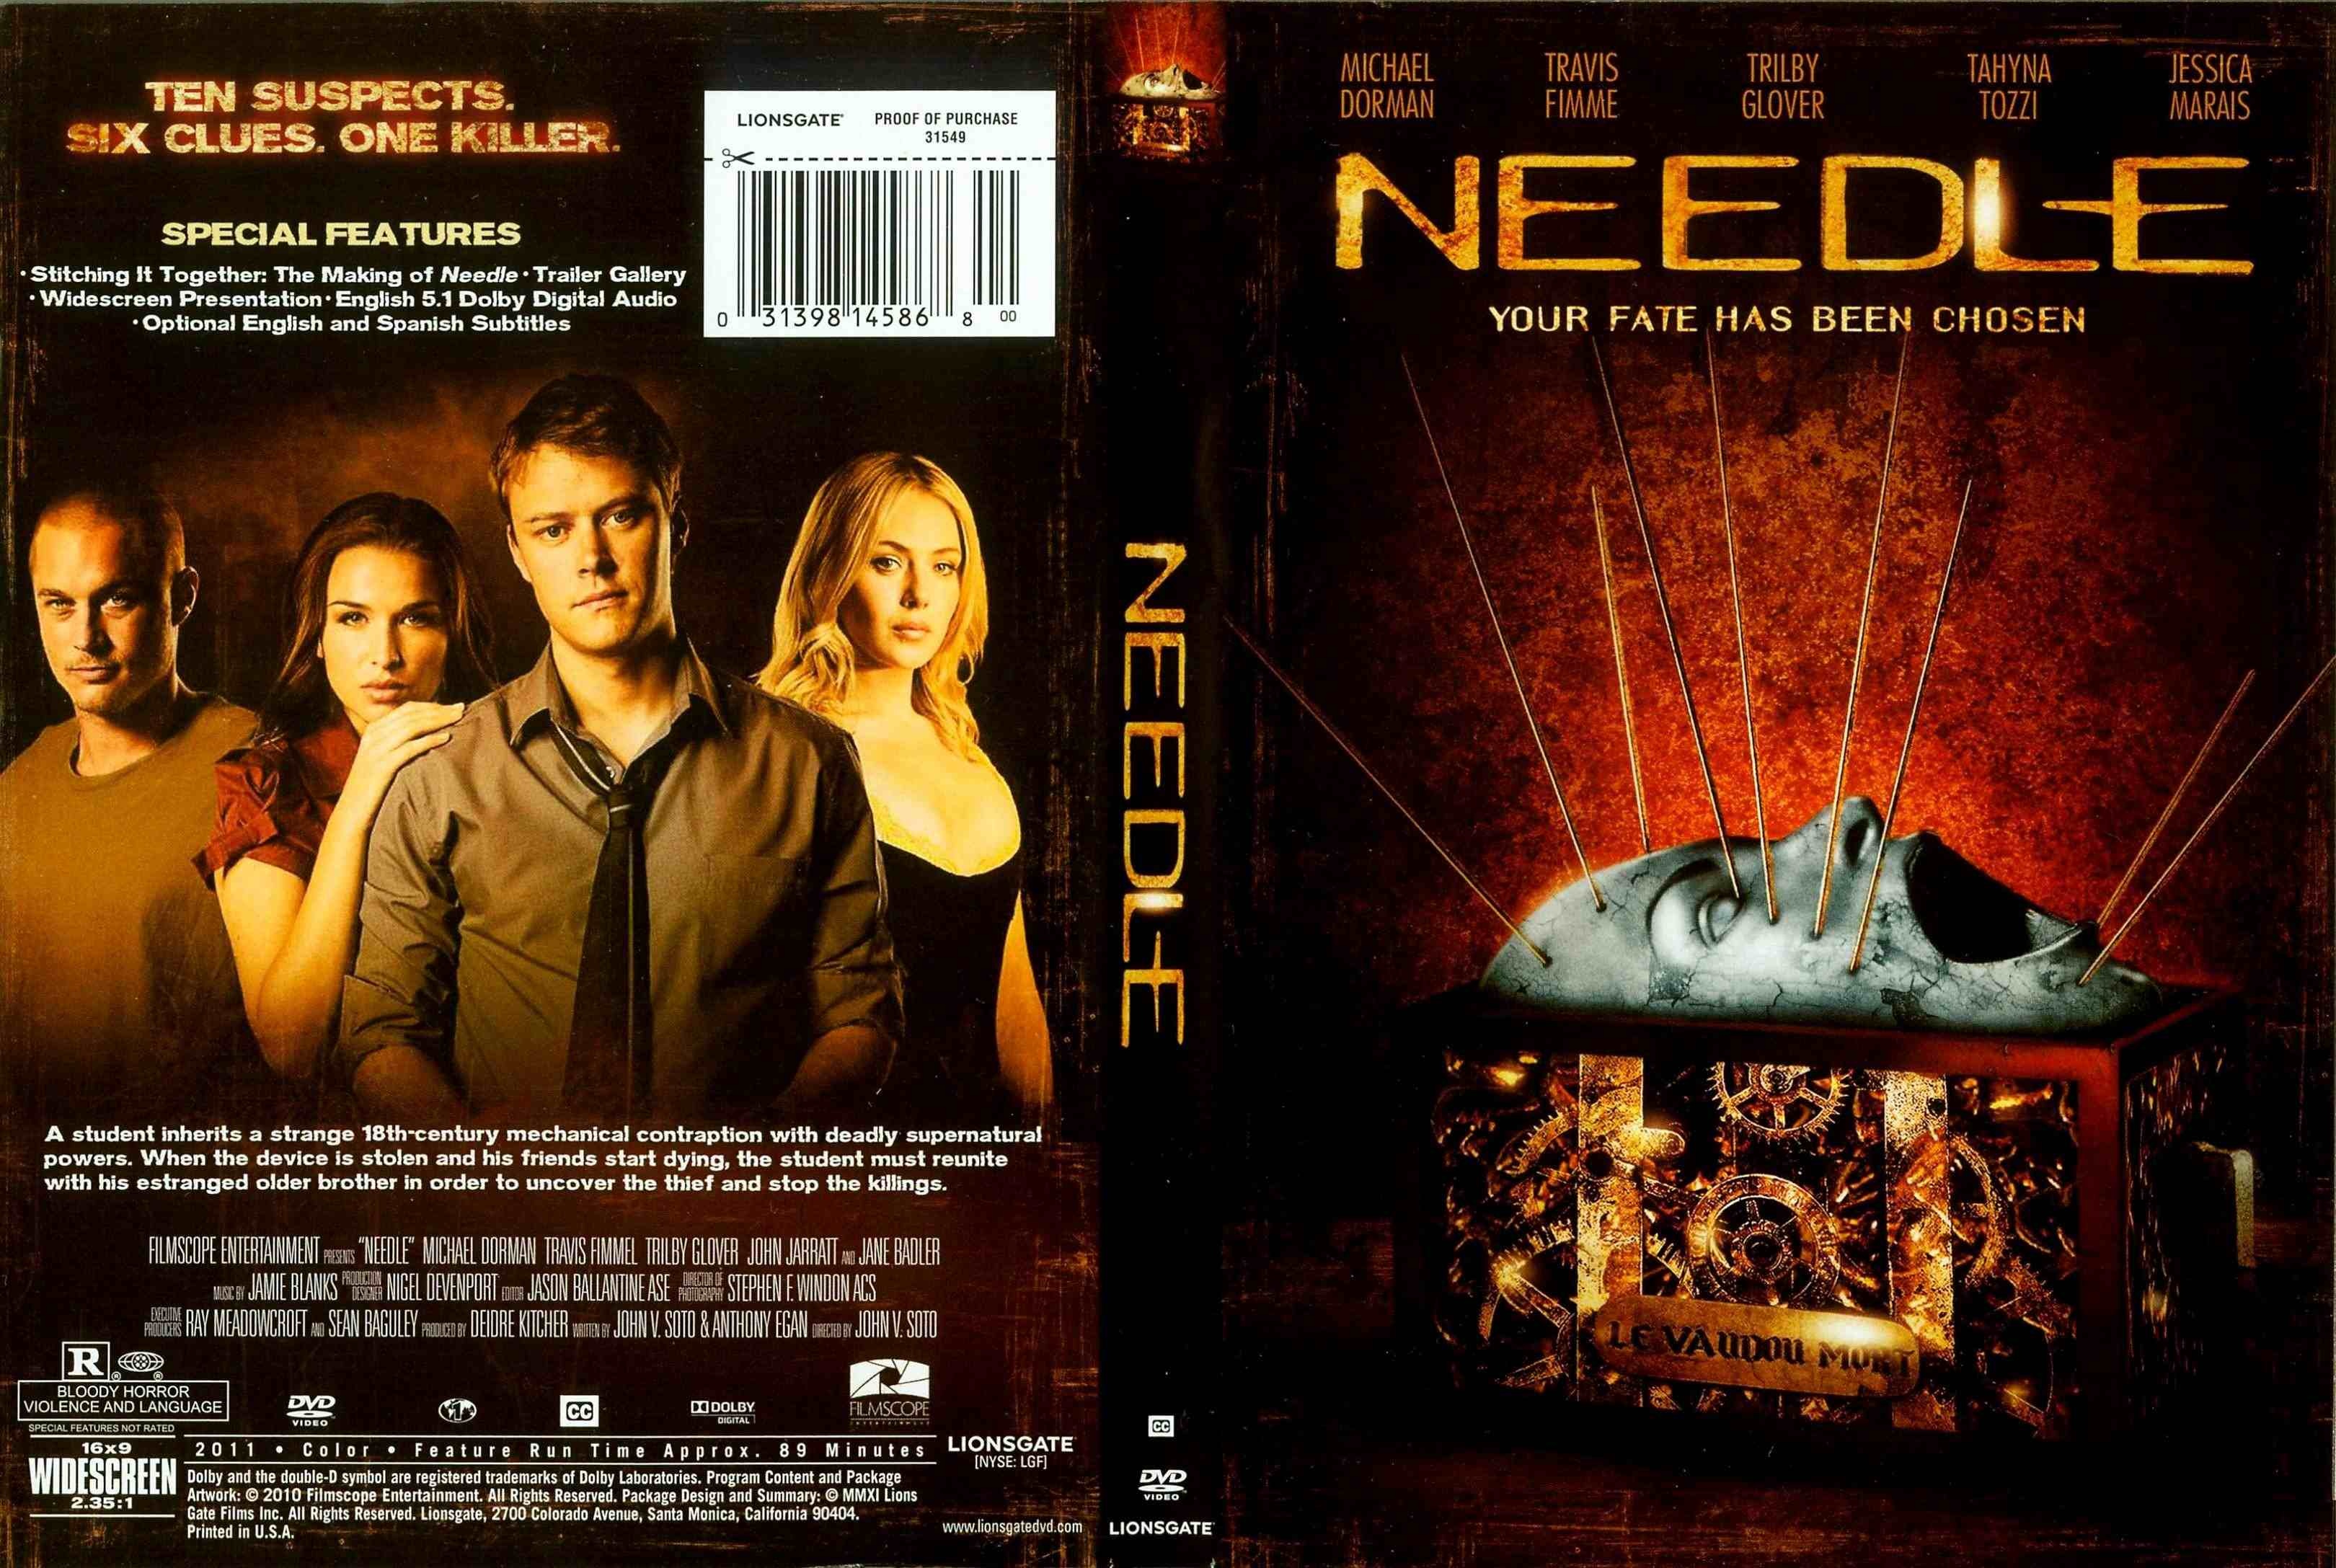 Jaquette DVD Needle - The Curse Zone 1